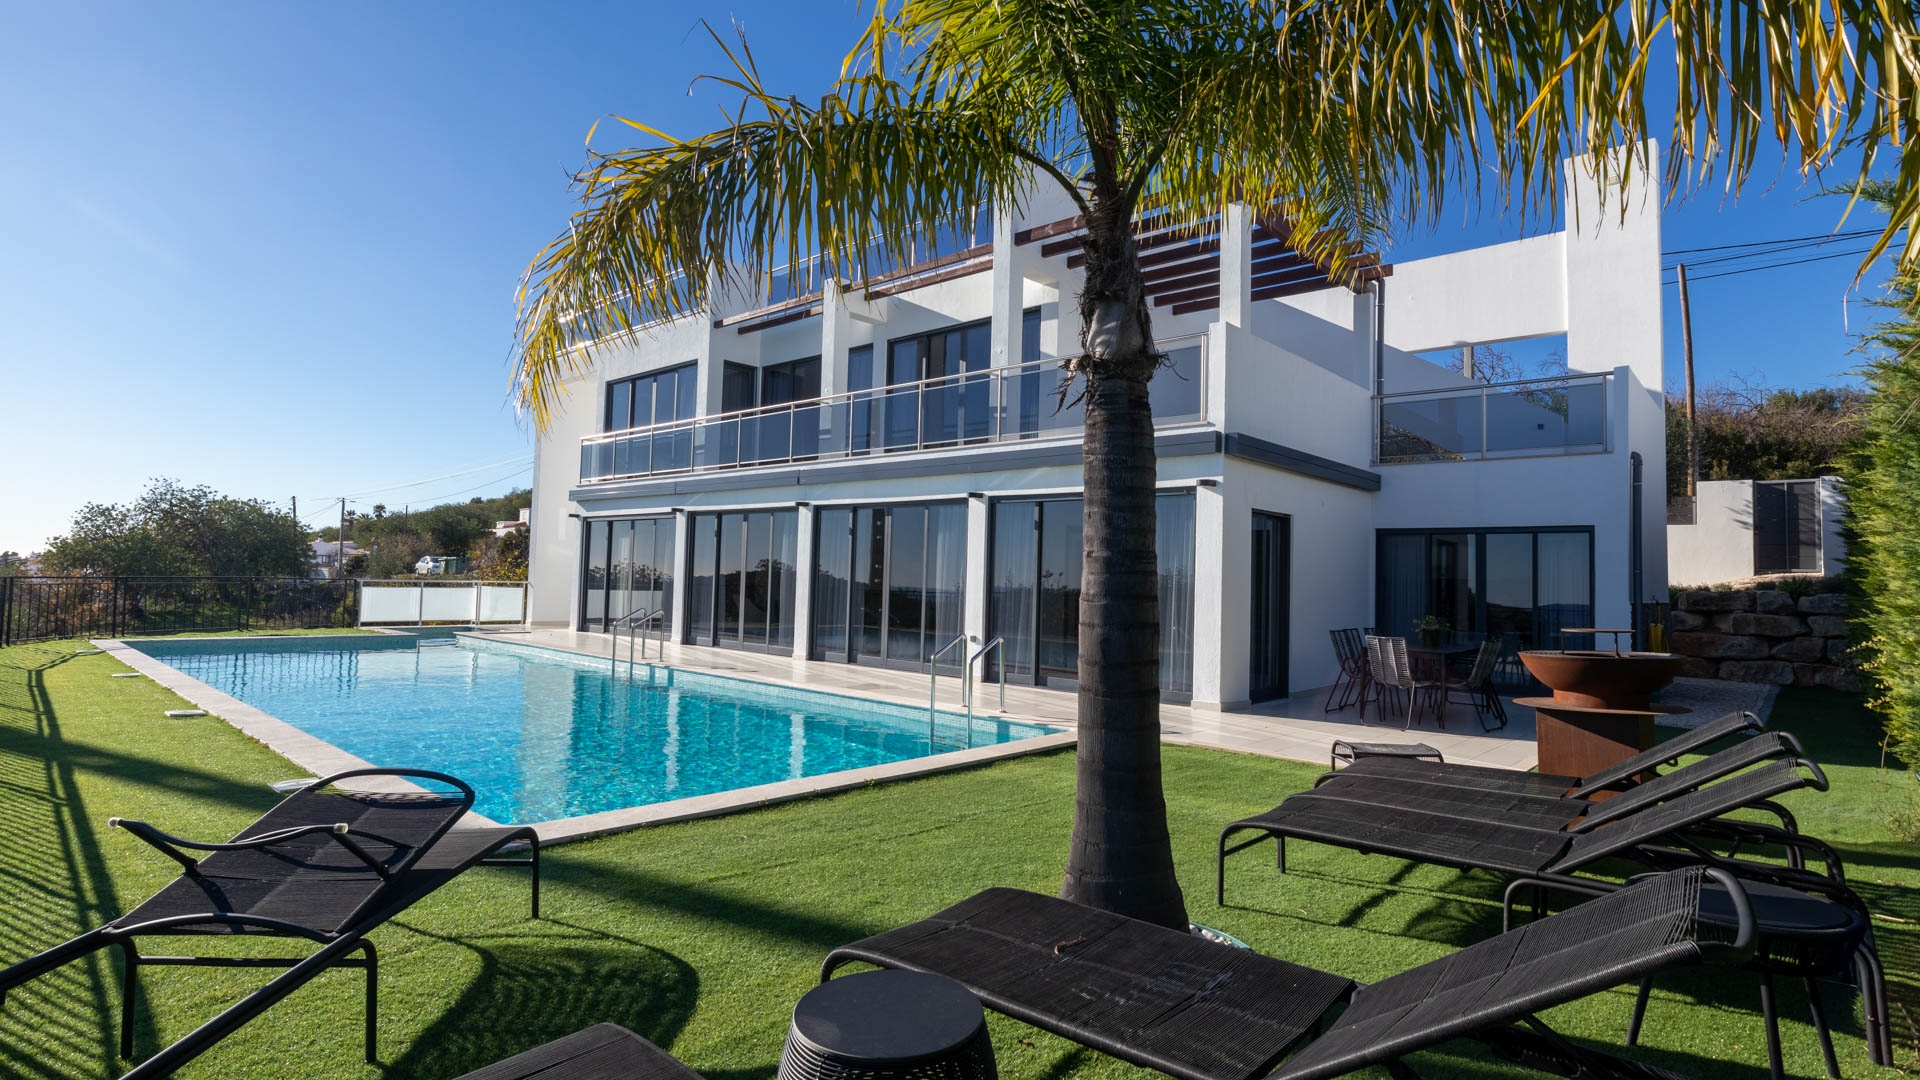 Contemporary 4 Bedroom Villa with panoramic sea views in the hills of Loulé  | VM1876 This modern 4 bedroom villa in the hills of Loulé offers breath taking panoramic sea views from every room, and is close to all amenities. 